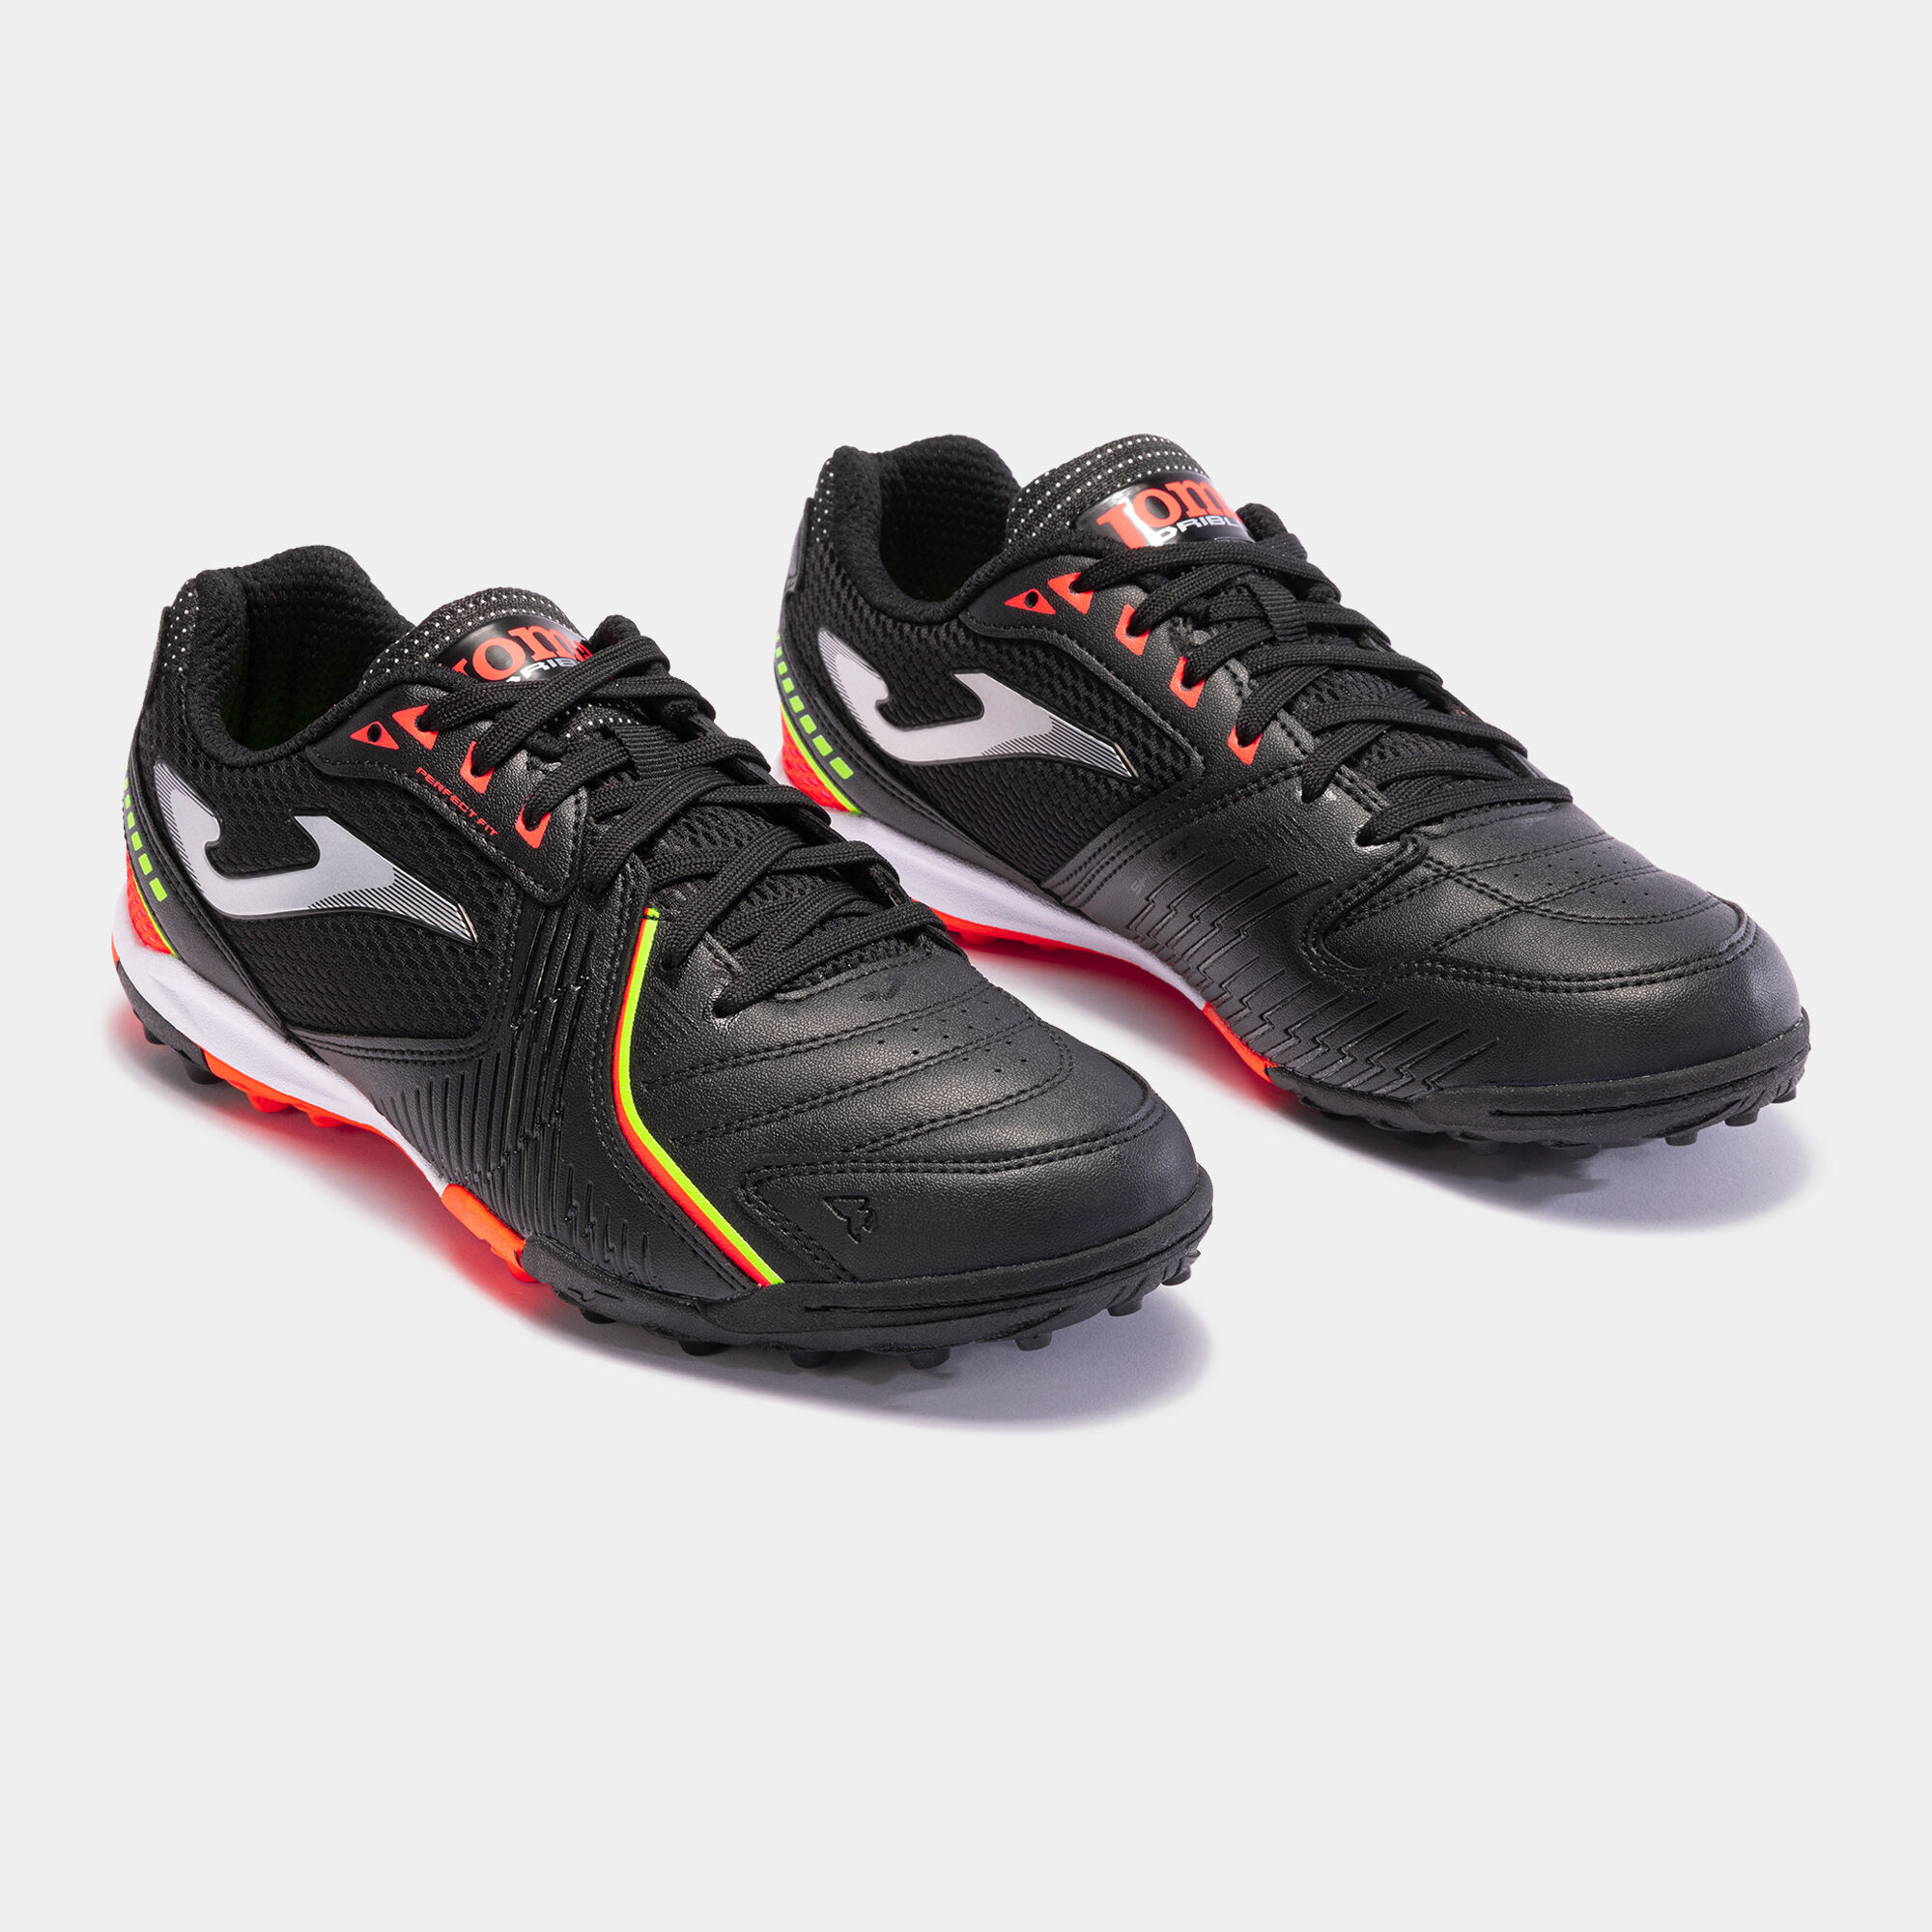 Chaussures football Dribling 23 moquette - turf noir rouge